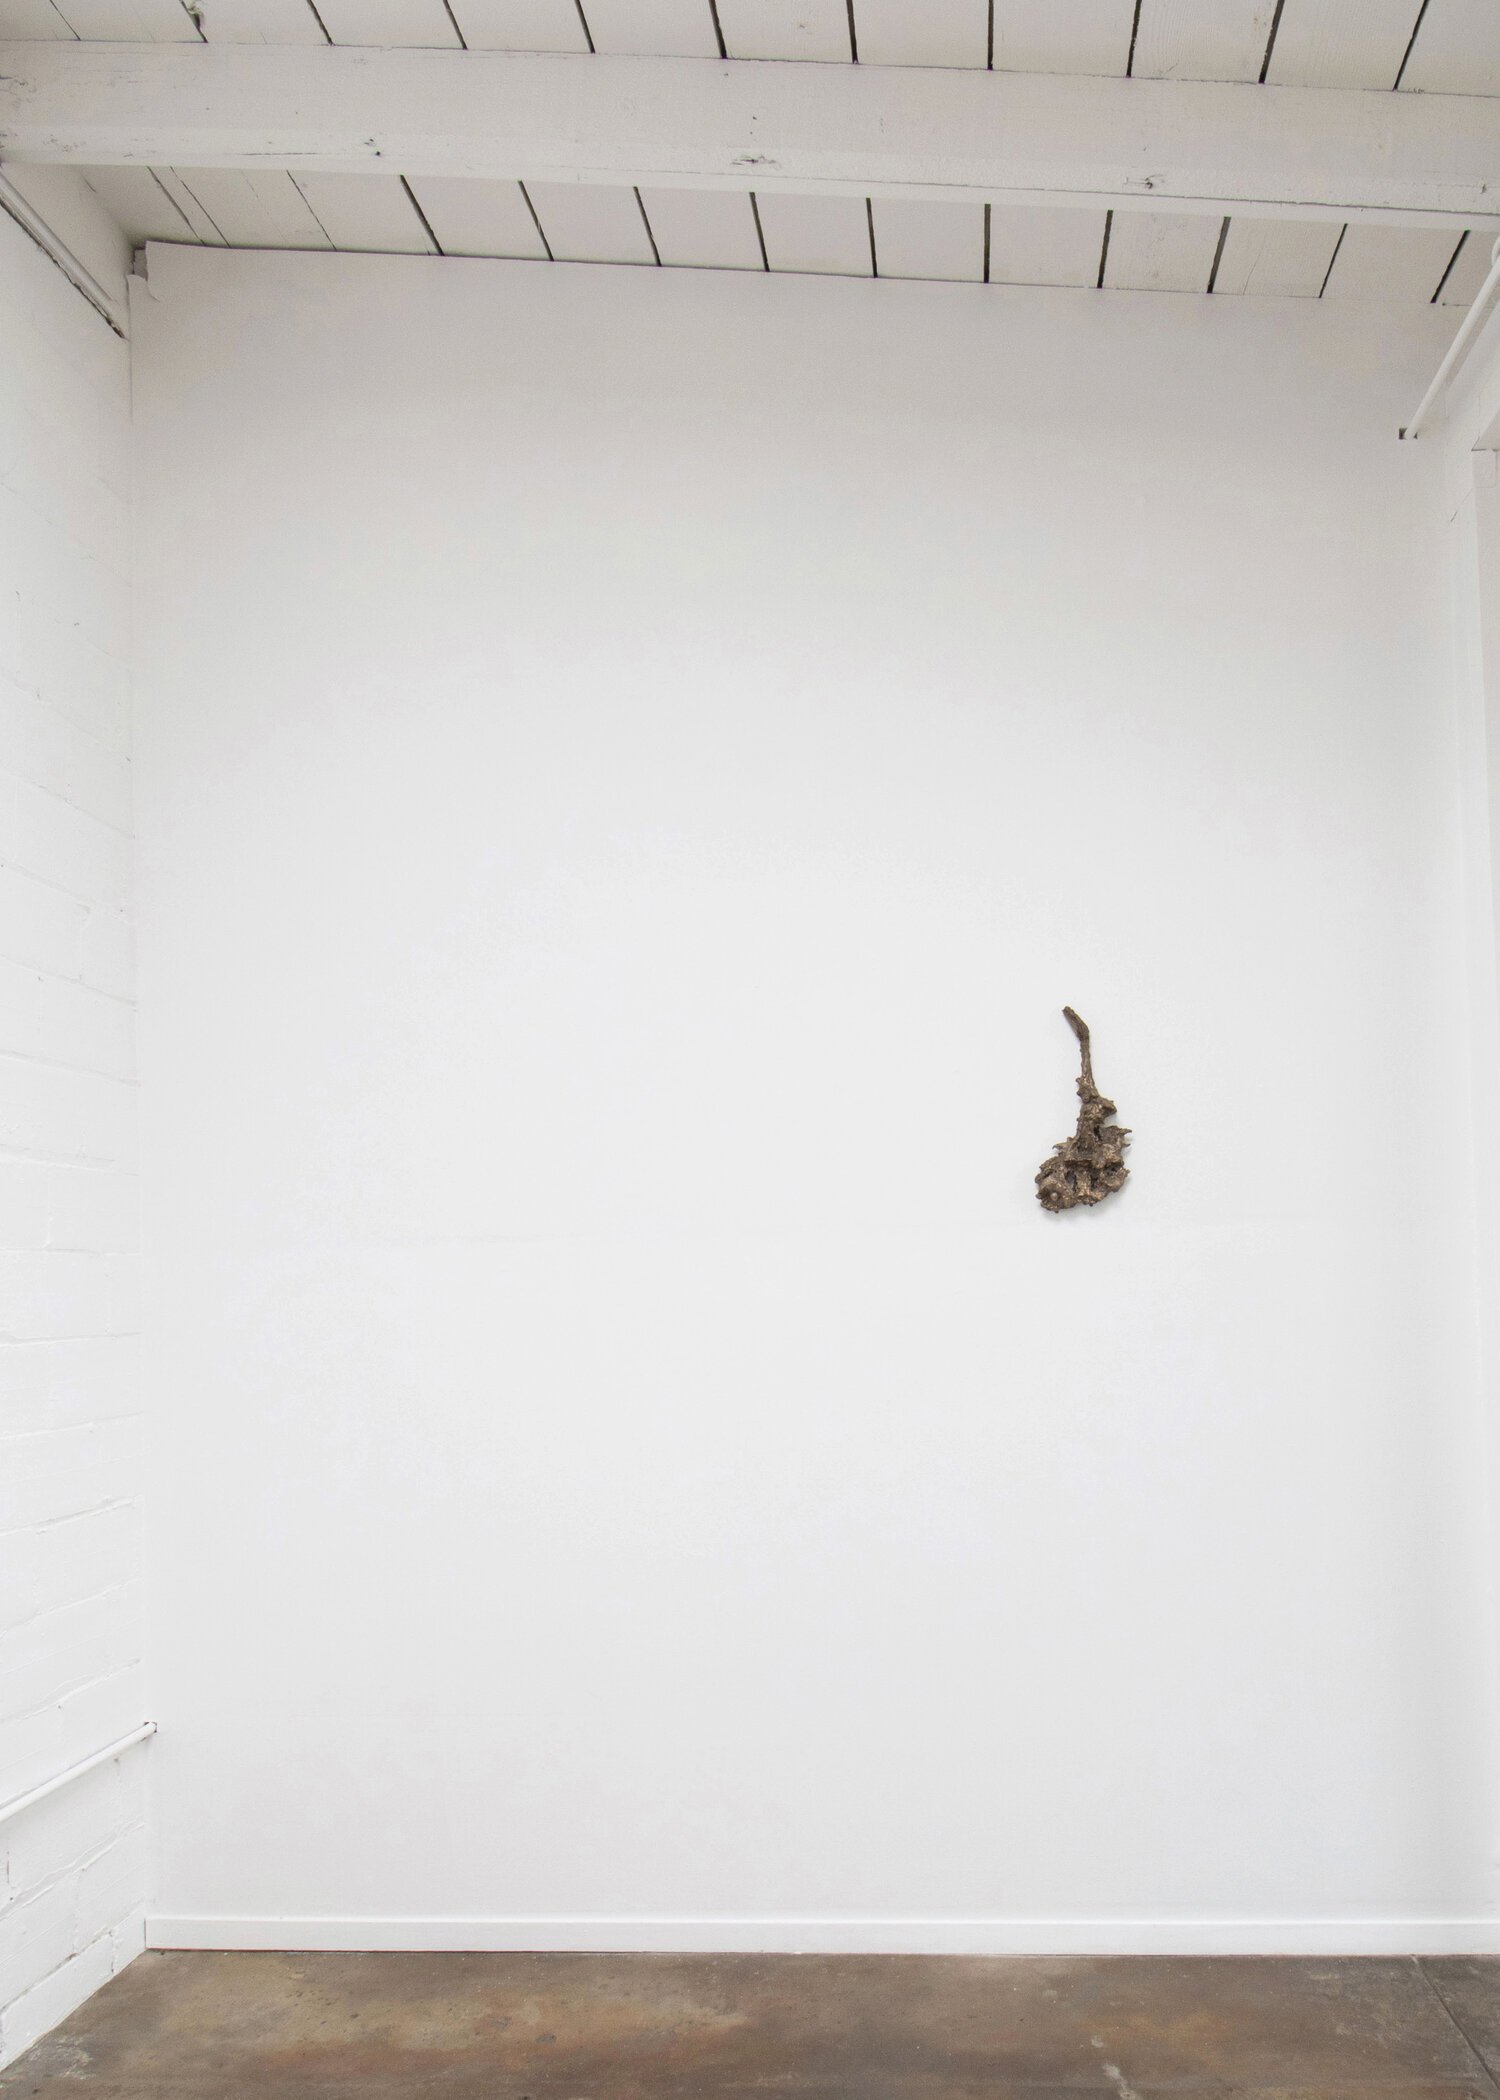   No Part Left Out,  installation view, 2020   Flowers , 2016, bronze, 15.75 x 8 x 3 inches 